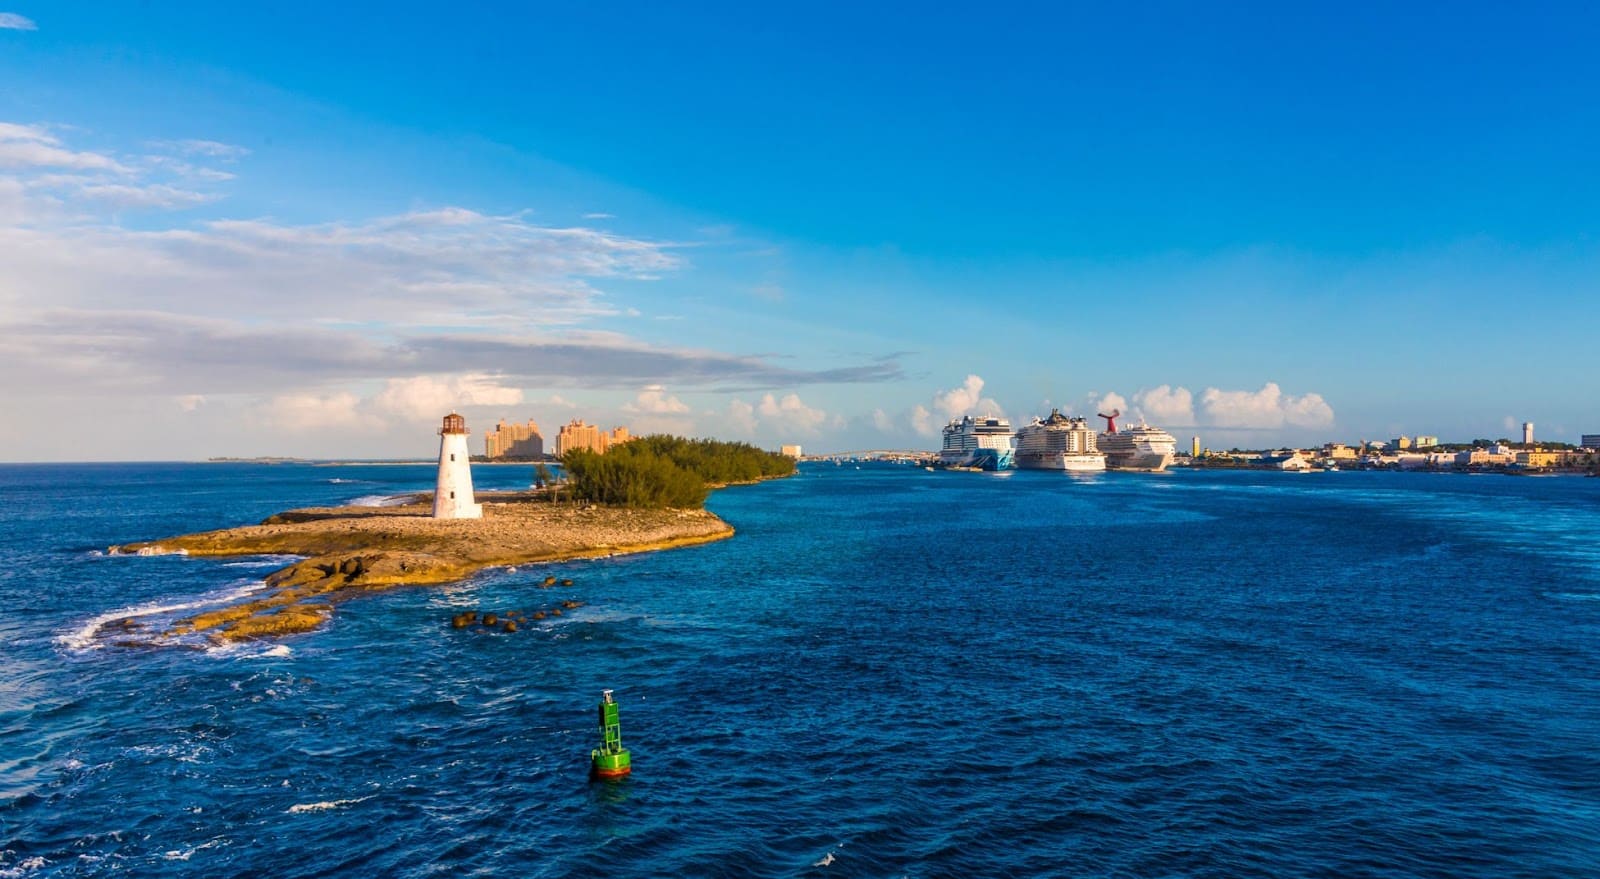 Lighthouse near Nassau with cruise ships in the distance